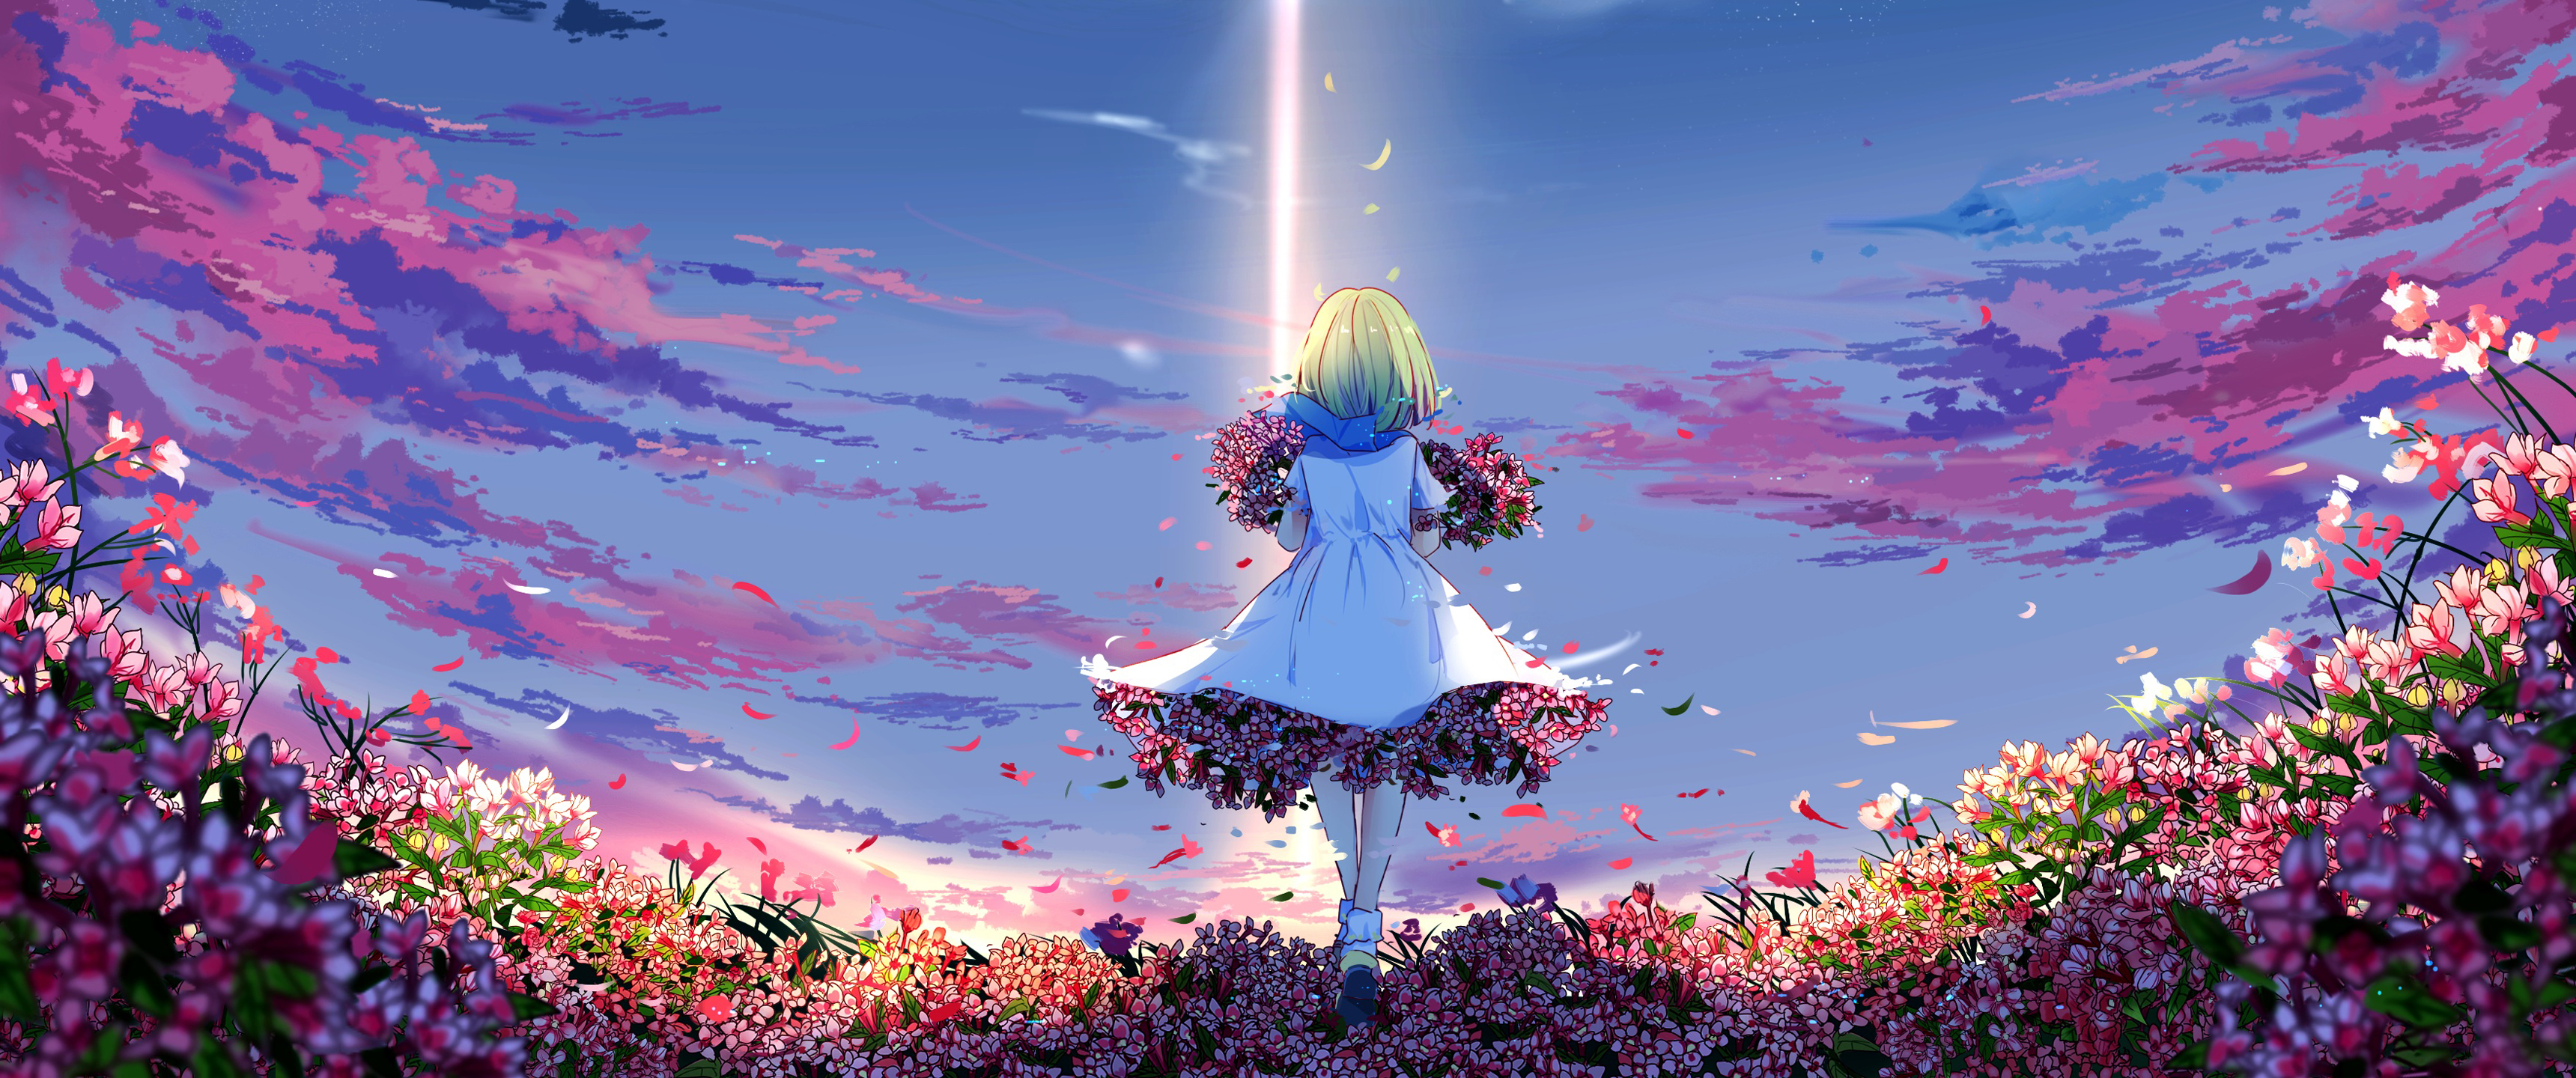 Hd Wallpapers Anime Spring - 3440x1440 Wallpaper 